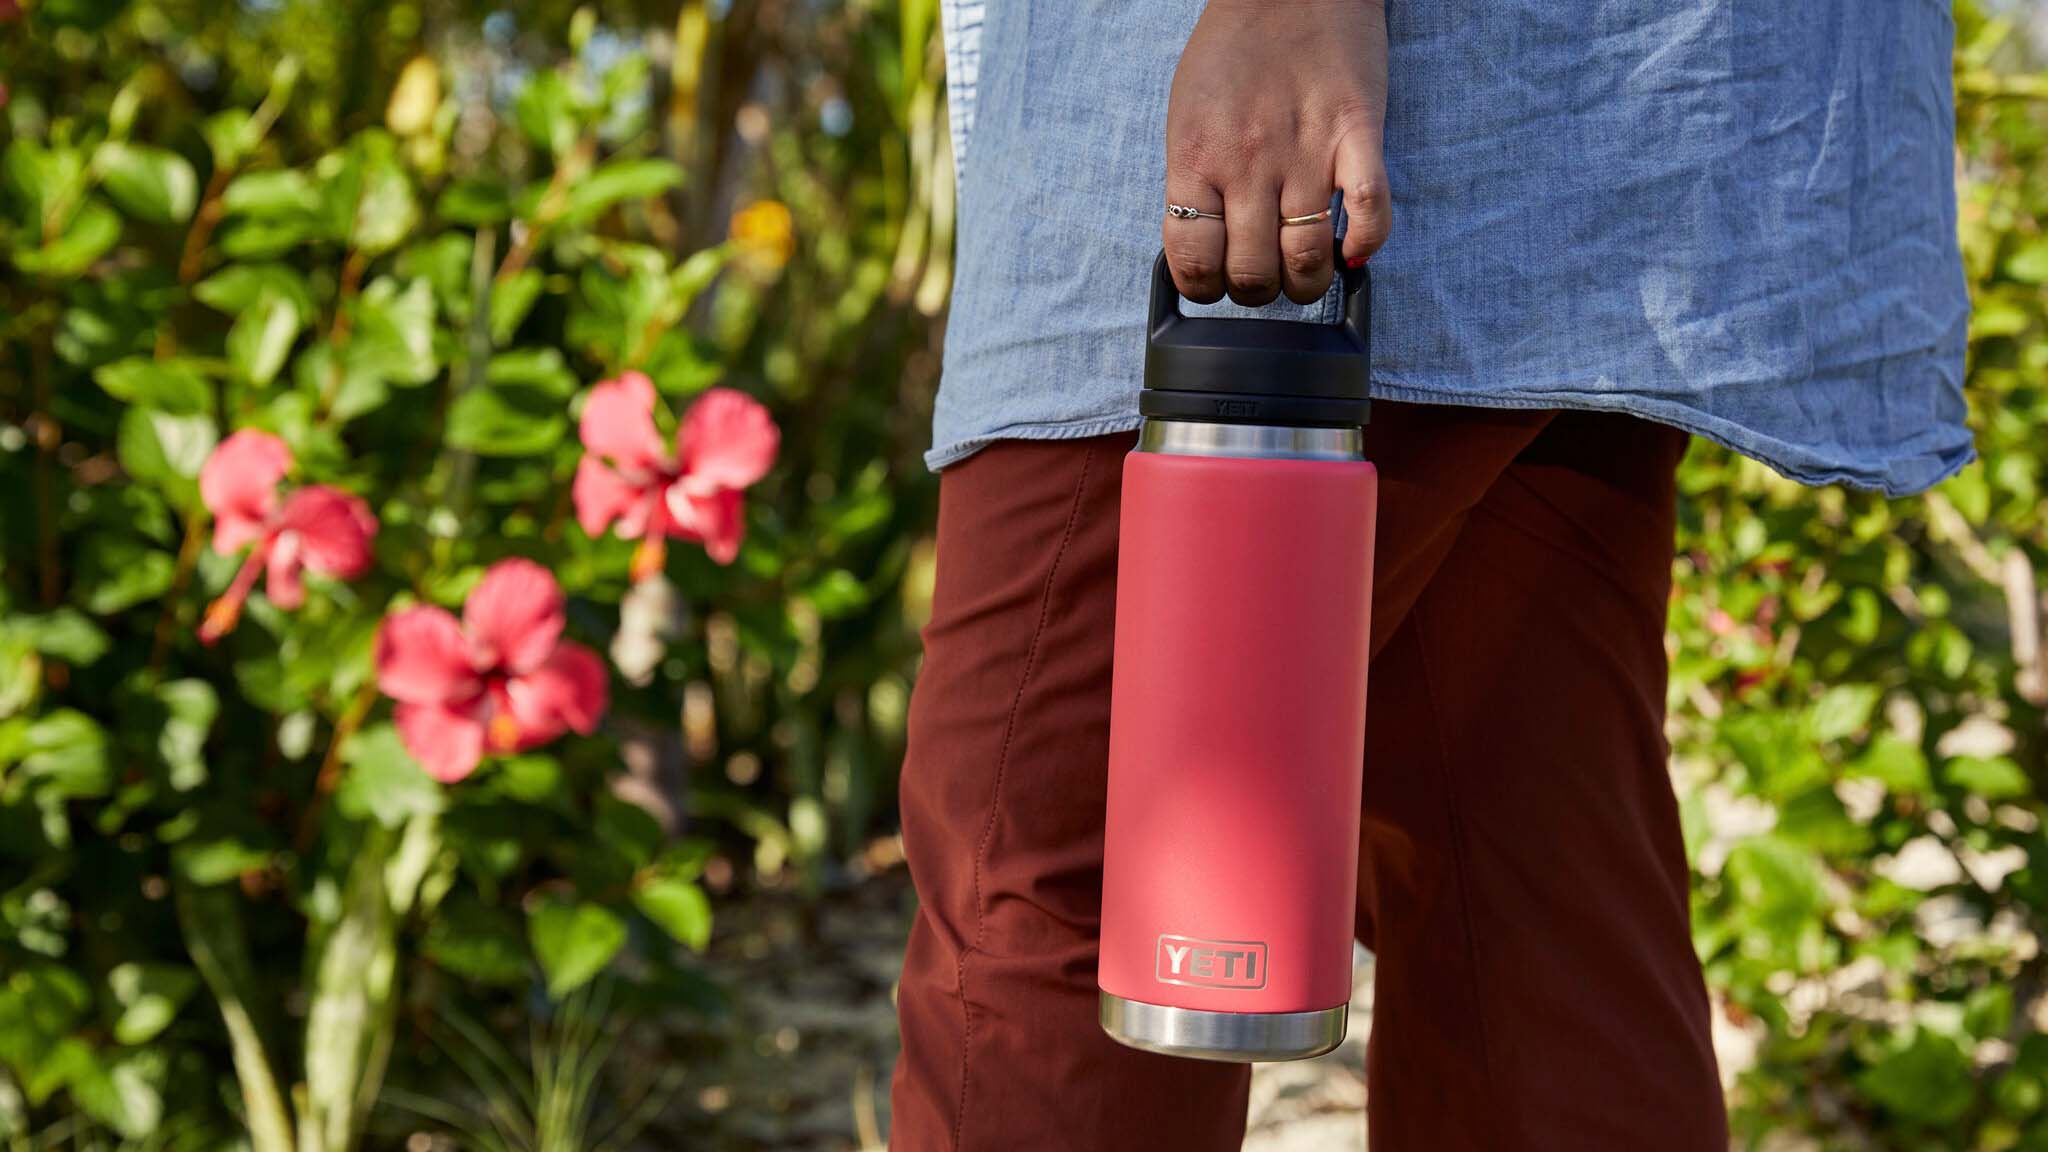 Yeti’s spring color collection has arrived in time for warm-weather adventures | CNN Underscored